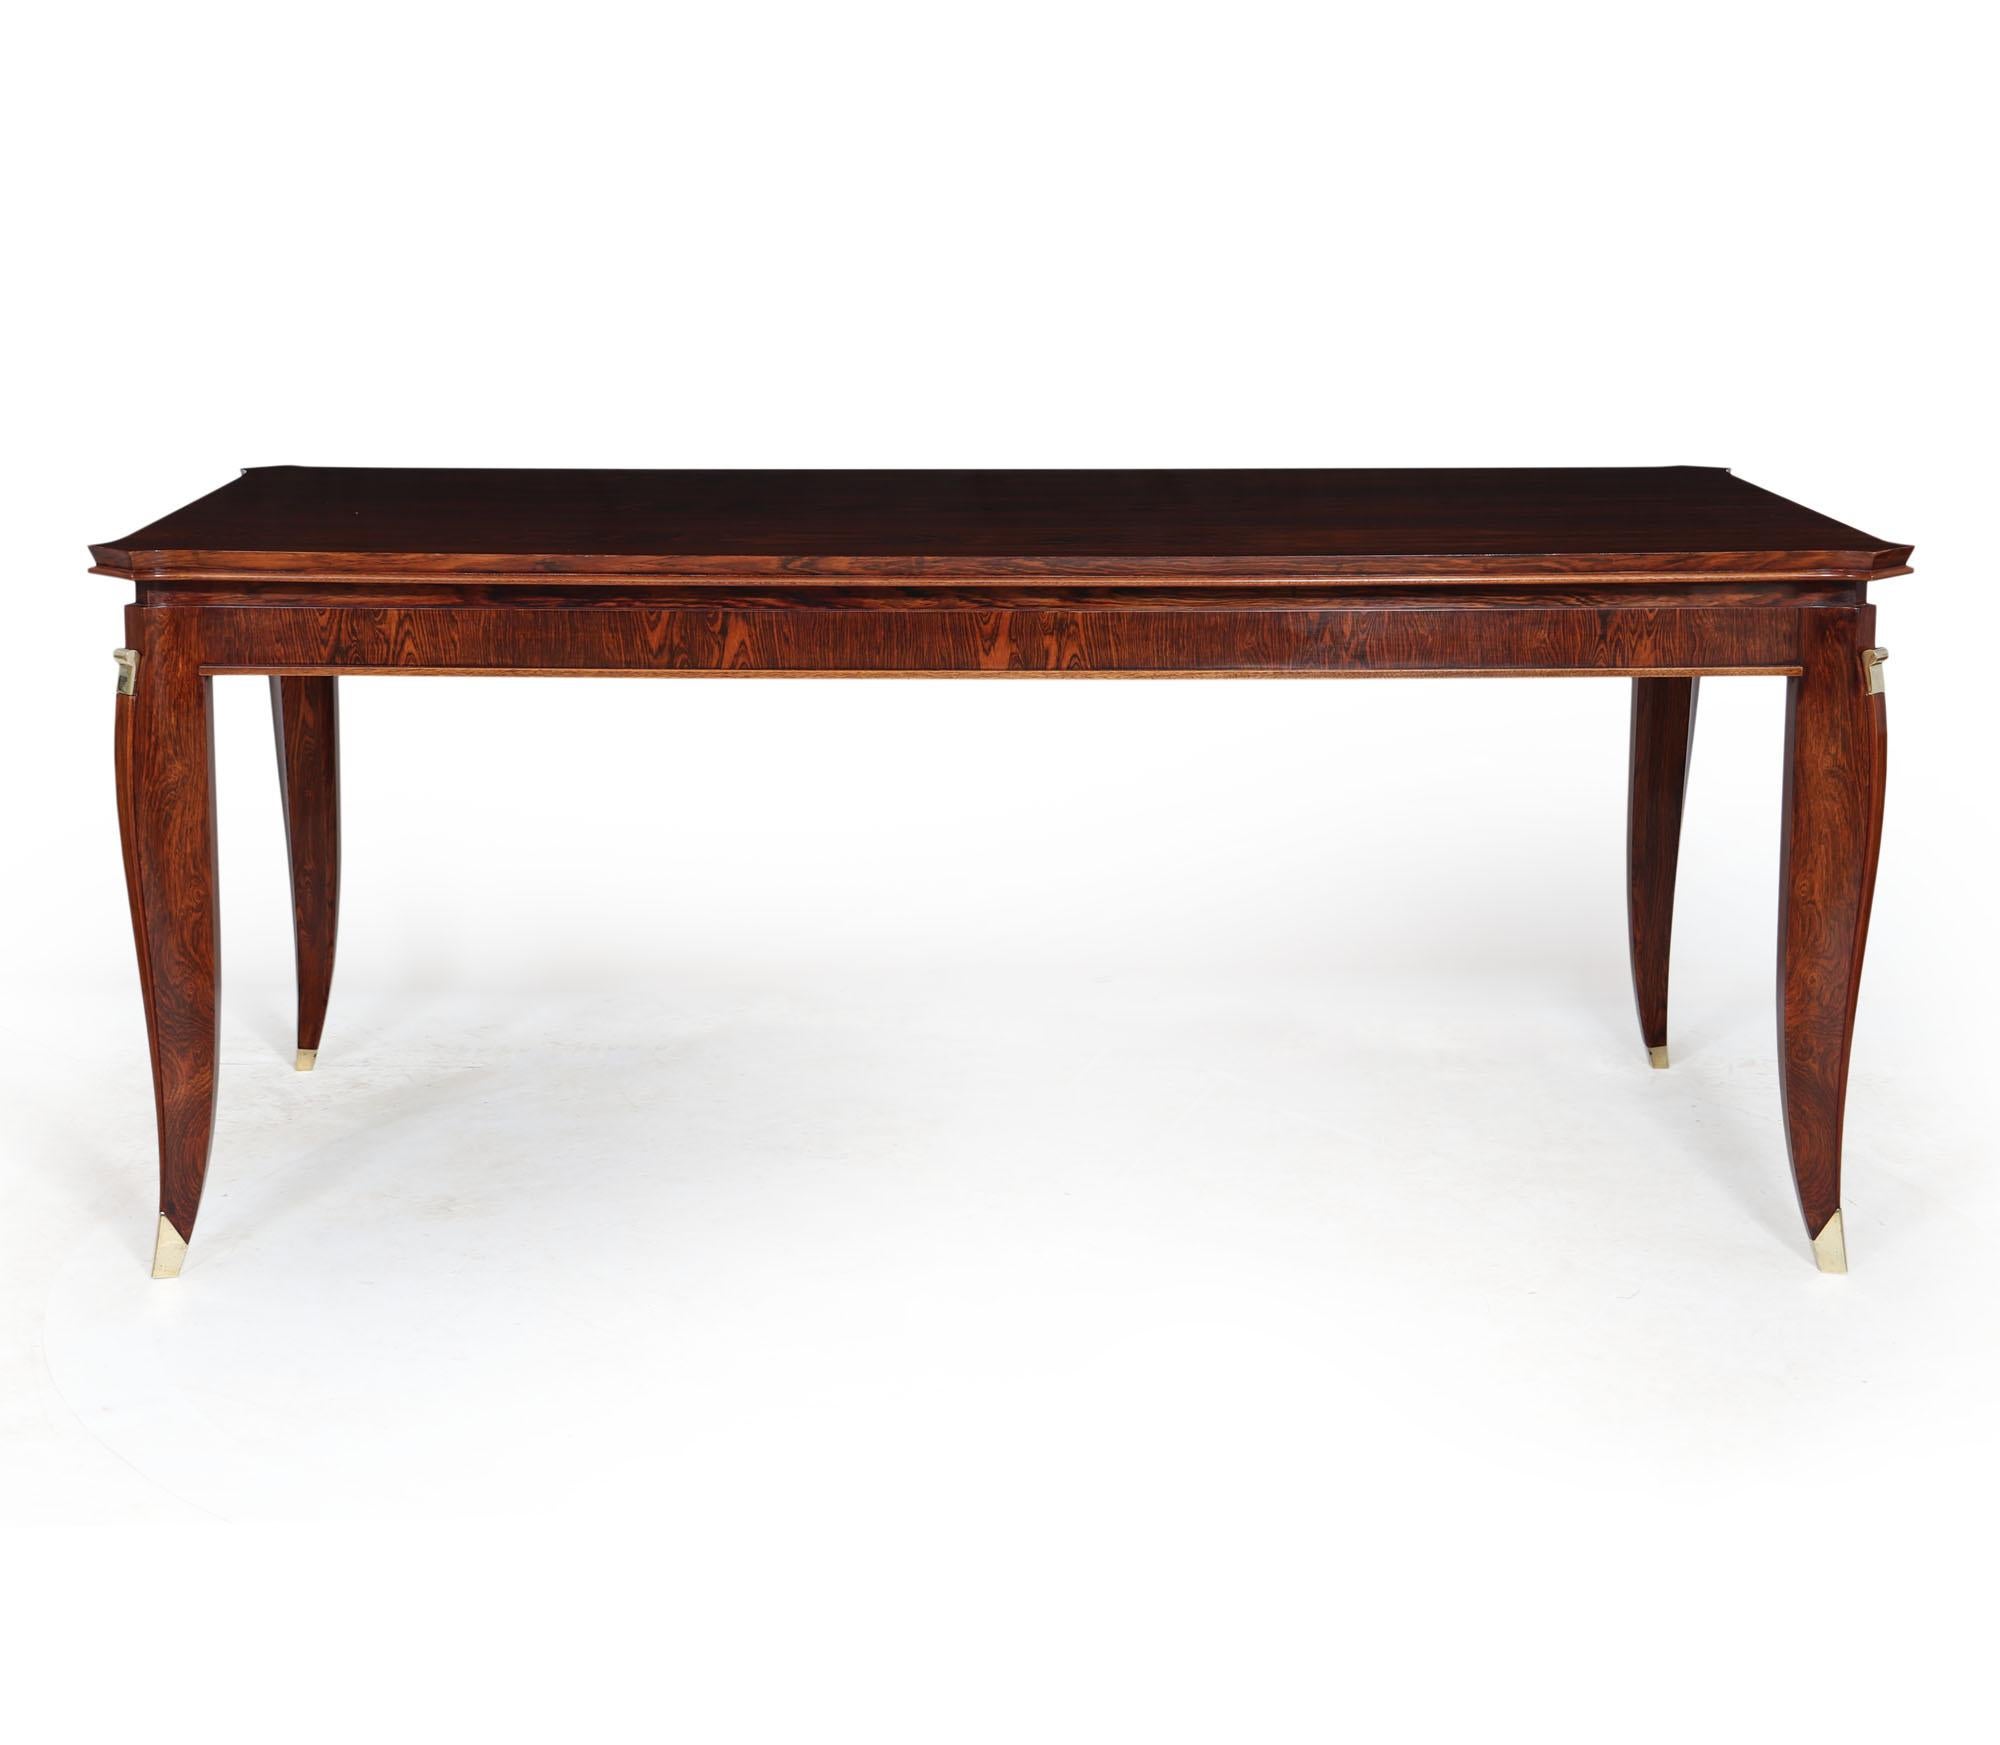 20th Century French Art Deco Dining Table by Maurice Rinck